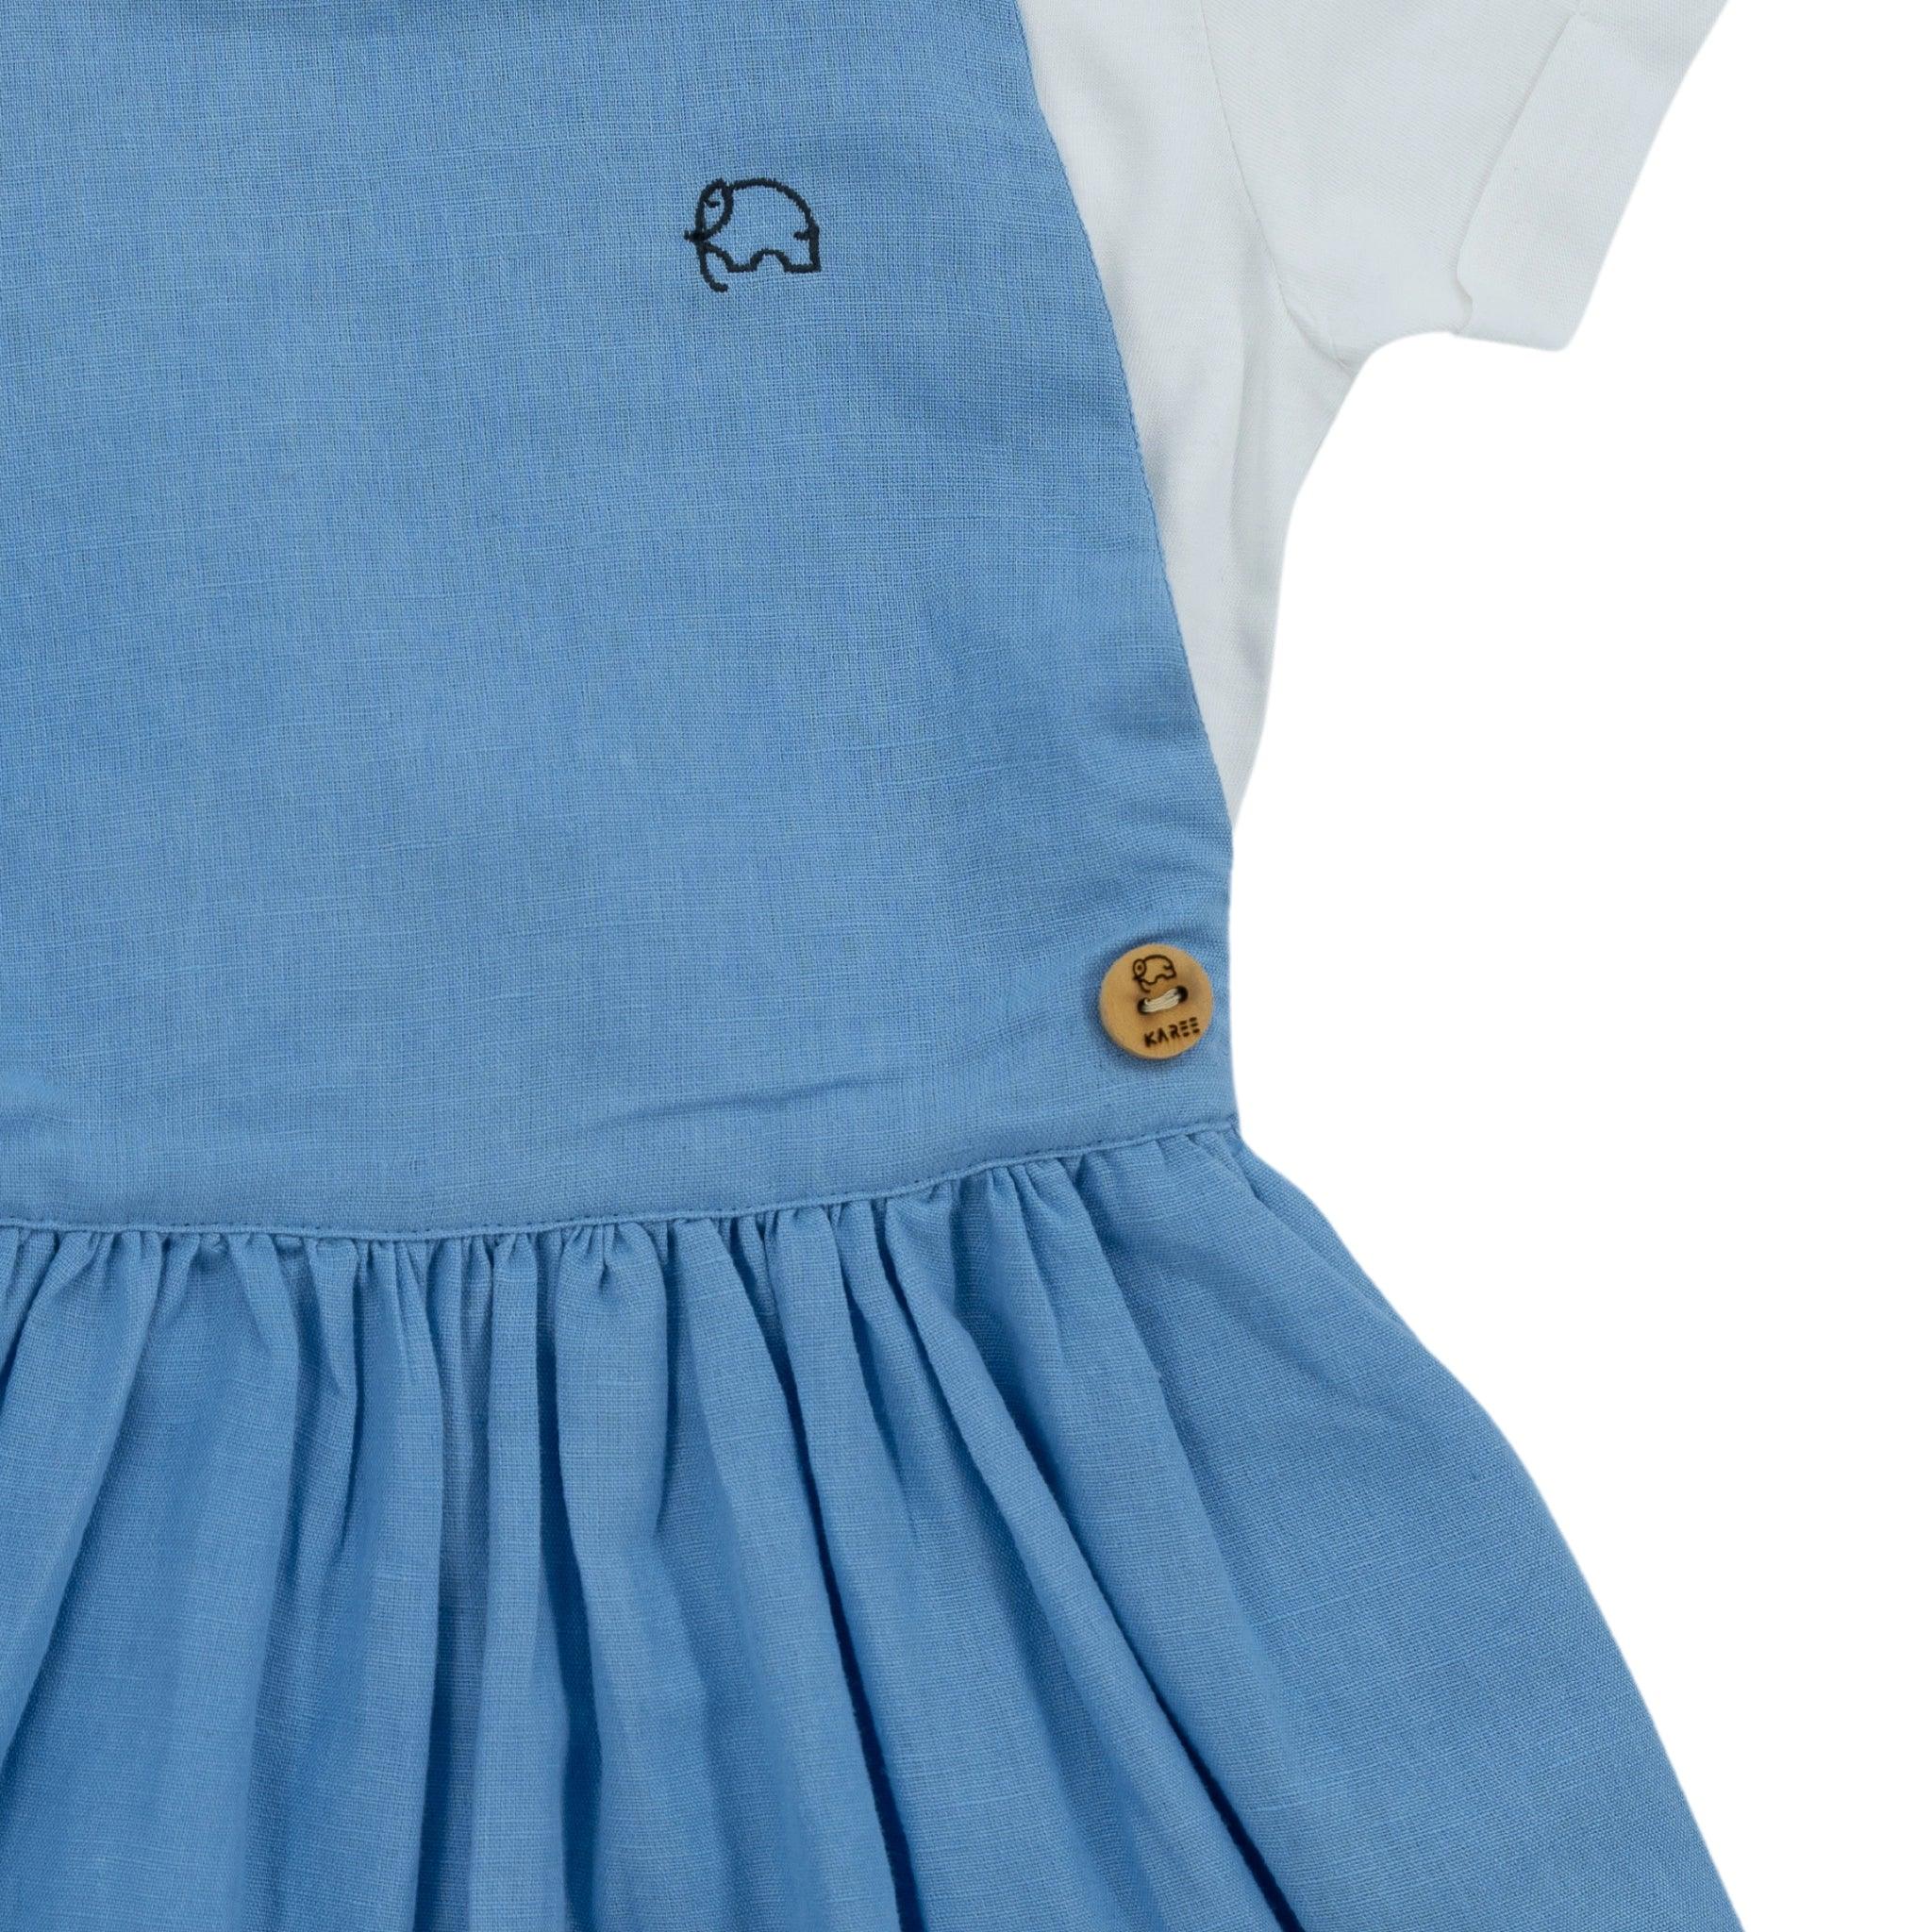 Cerulean Blue Linen girls' pinafore with a small elephant motif on the chest and a wood button on the side by Karee.